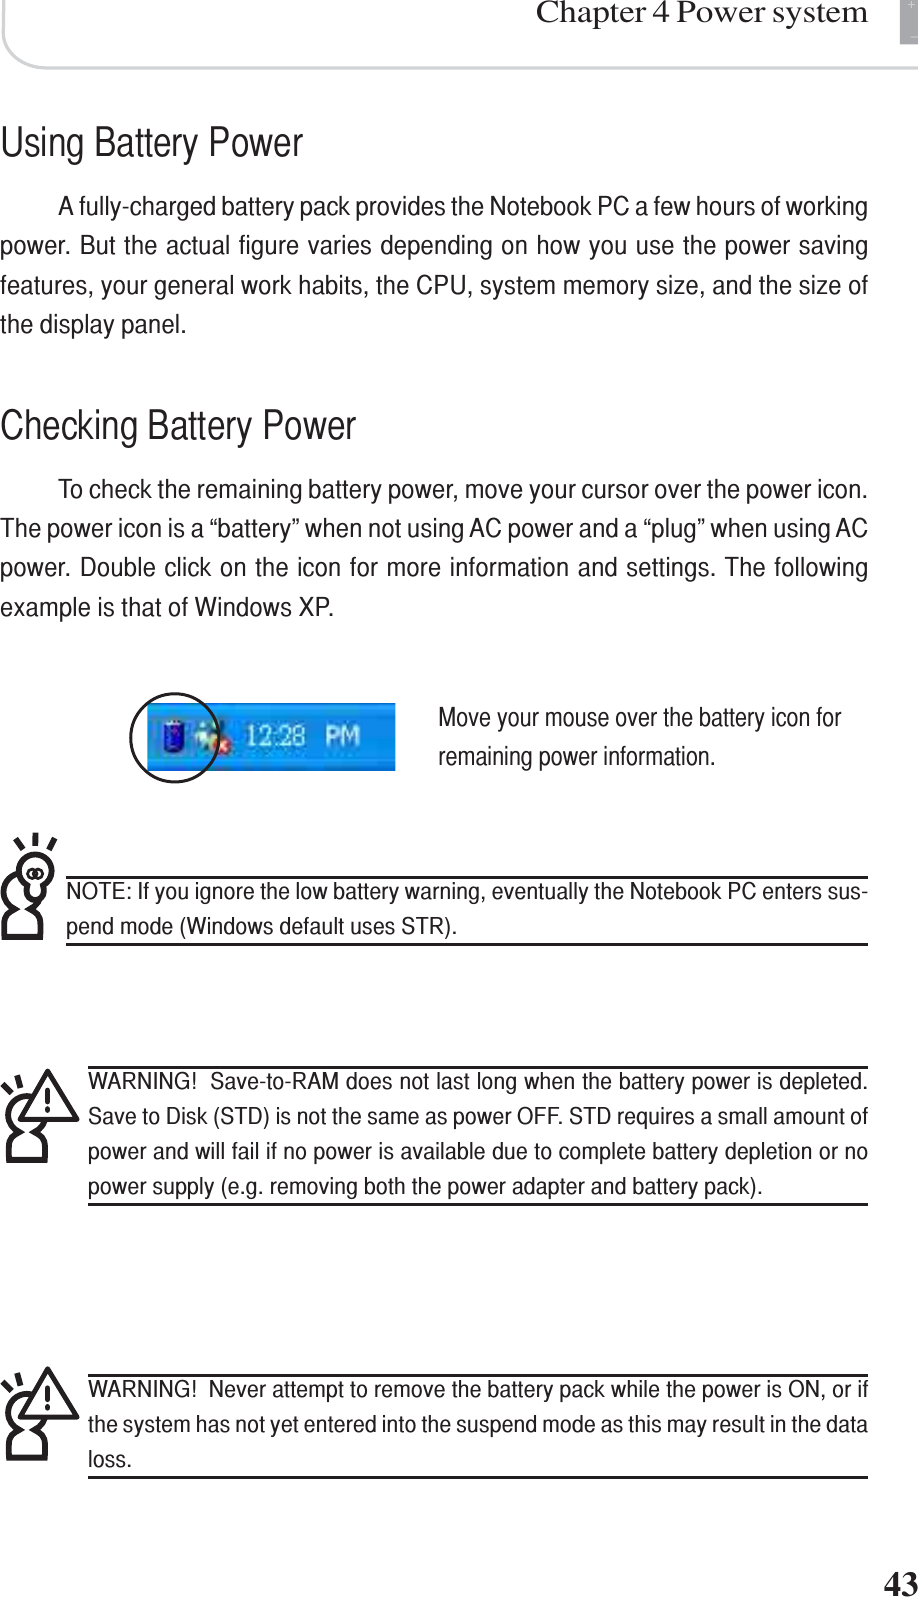 +-Chapter 4 Power system43Using Battery PowerA fully-charged battery pack provides the Notebook PC a few hours of workingpower. But the actual figure varies depending on how you use the power savingfeatures, your general work habits, the CPU, system memory size, and the size ofthe display panel.Checking Battery PowerTo check the remaining battery power, move your cursor over the power icon.The power icon is a “battery” when not using AC power and a “plug” when using ACpower. Double click on the icon for more information and settings. The followingexample is that of Windows XP.NOTE: If you ignore the low battery warning, eventually the Notebook PC enters sus-pend mode (Windows default uses STR).WARNING!  Save-to-RAM does not last long when the battery power is depleted.Save to Disk (STD) is not the same as power OFF. STD requires a small amount ofpower and will fail if no power is available due to complete battery depletion or nopower supply (e.g. removing both the power adapter and battery pack).WARNING!  Never attempt to remove the battery pack while the power is ON, or ifthe system has not yet entered into the suspend mode as this may result in the dataloss.Move your mouse over the battery icon forremaining power information.